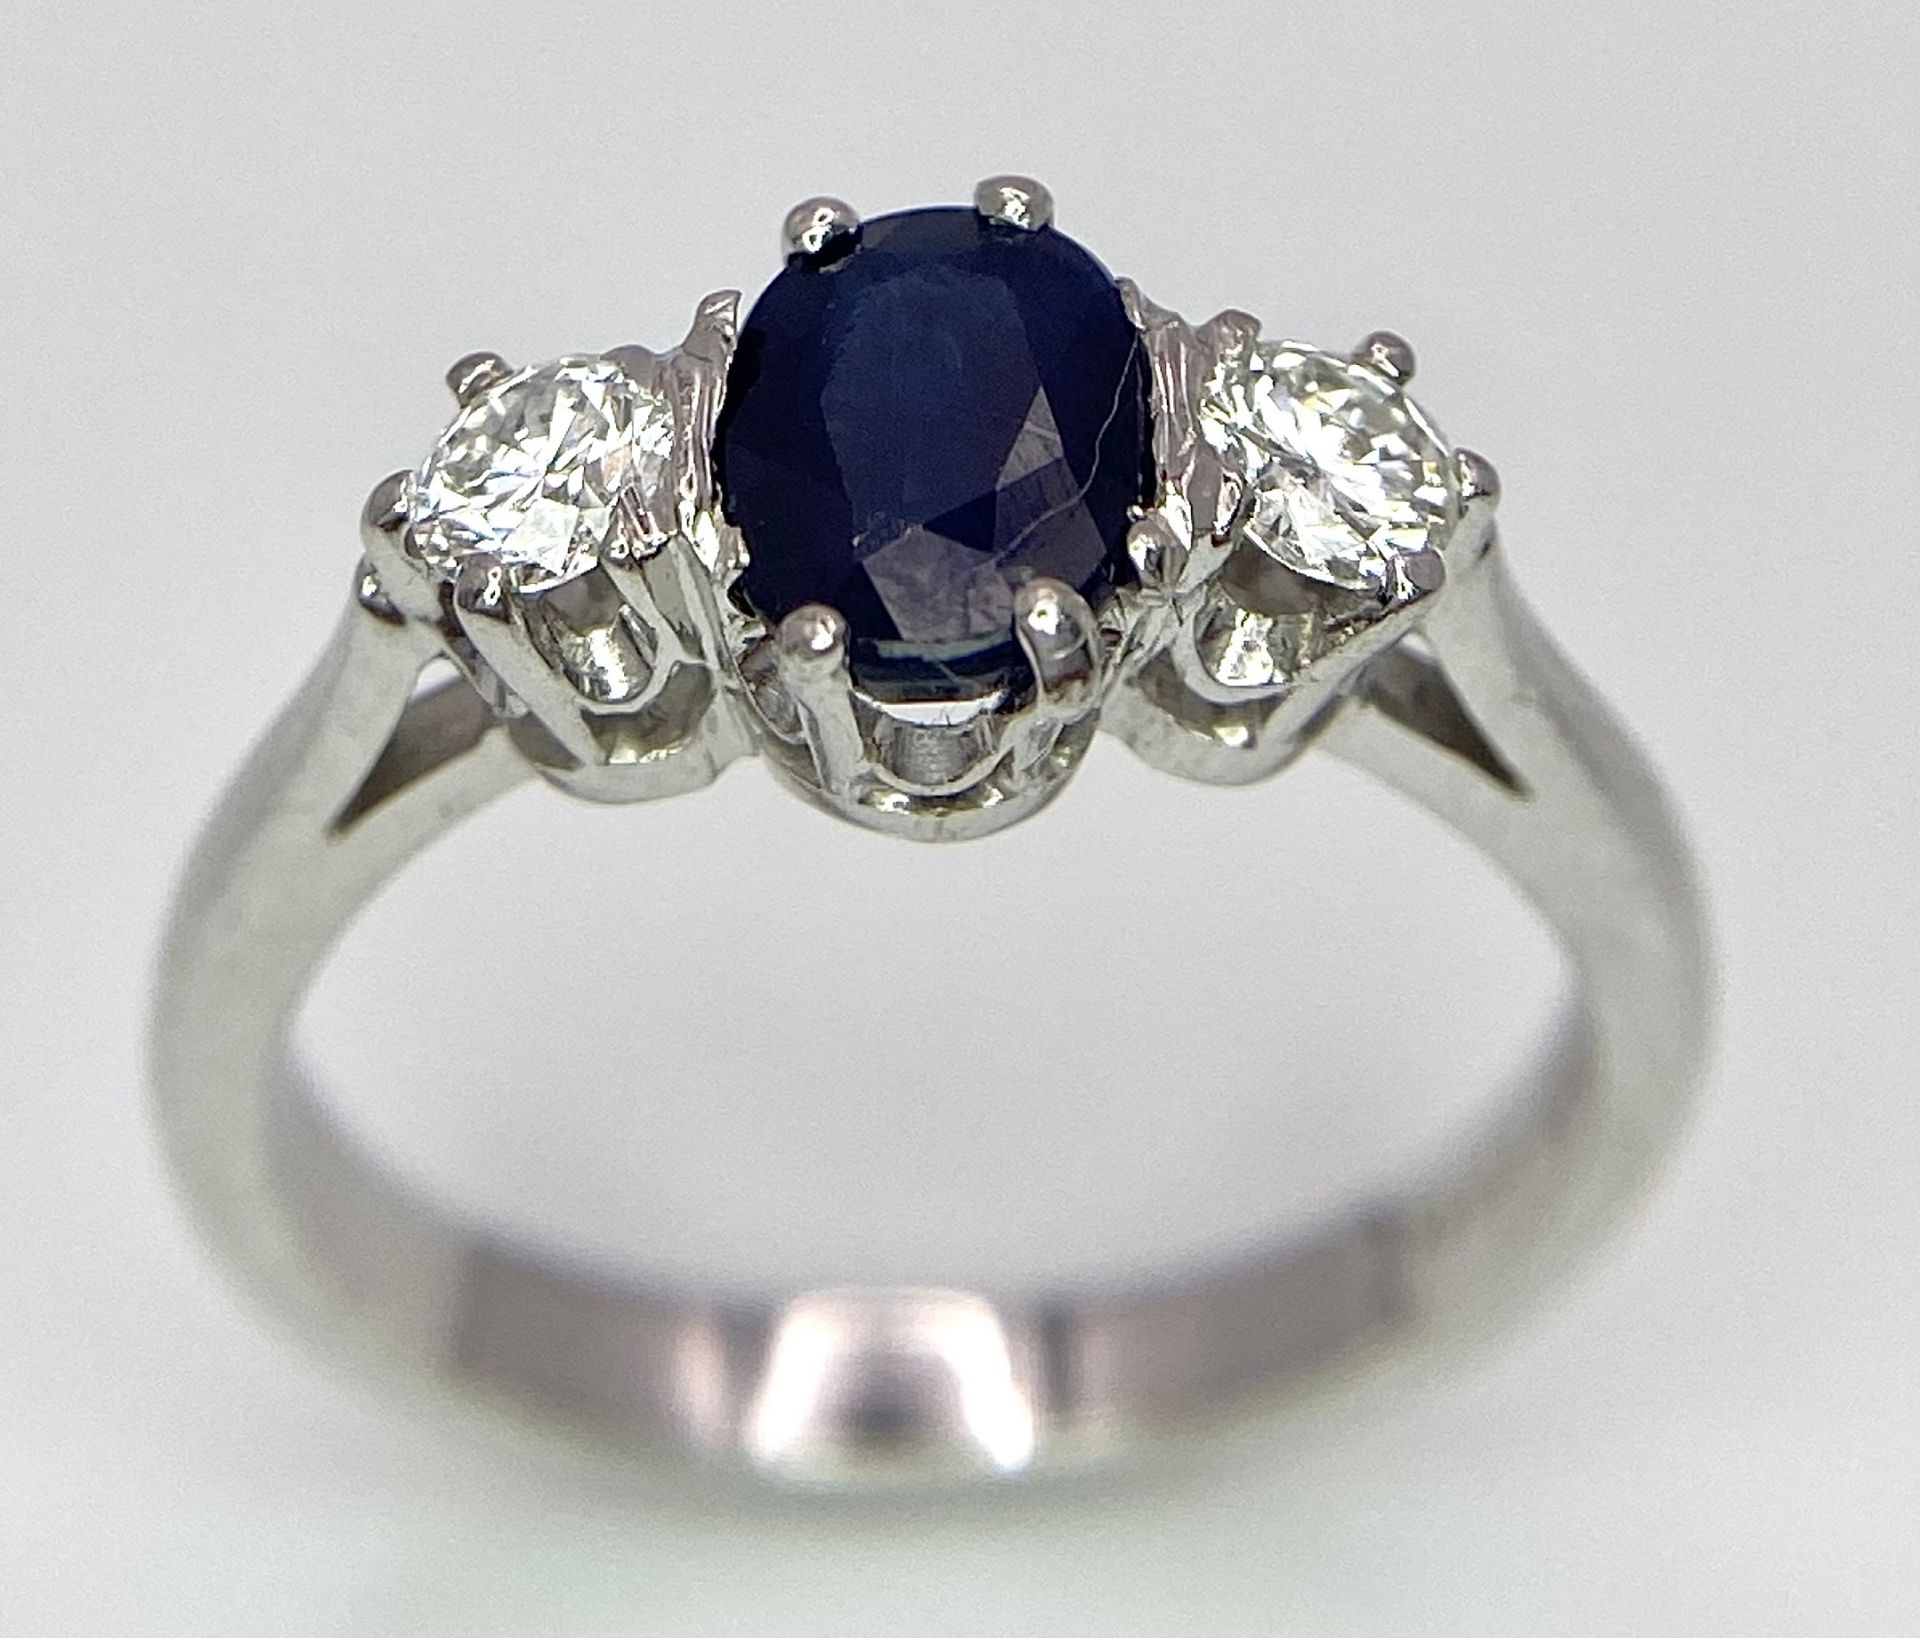 AN 18K WHITE GOLD, DIAMOND AND SAPPHIRE 3 STONE RING. OVAL BLUE SAPPHIRE - 0.75CT AND 0.30CT OF - Image 3 of 6